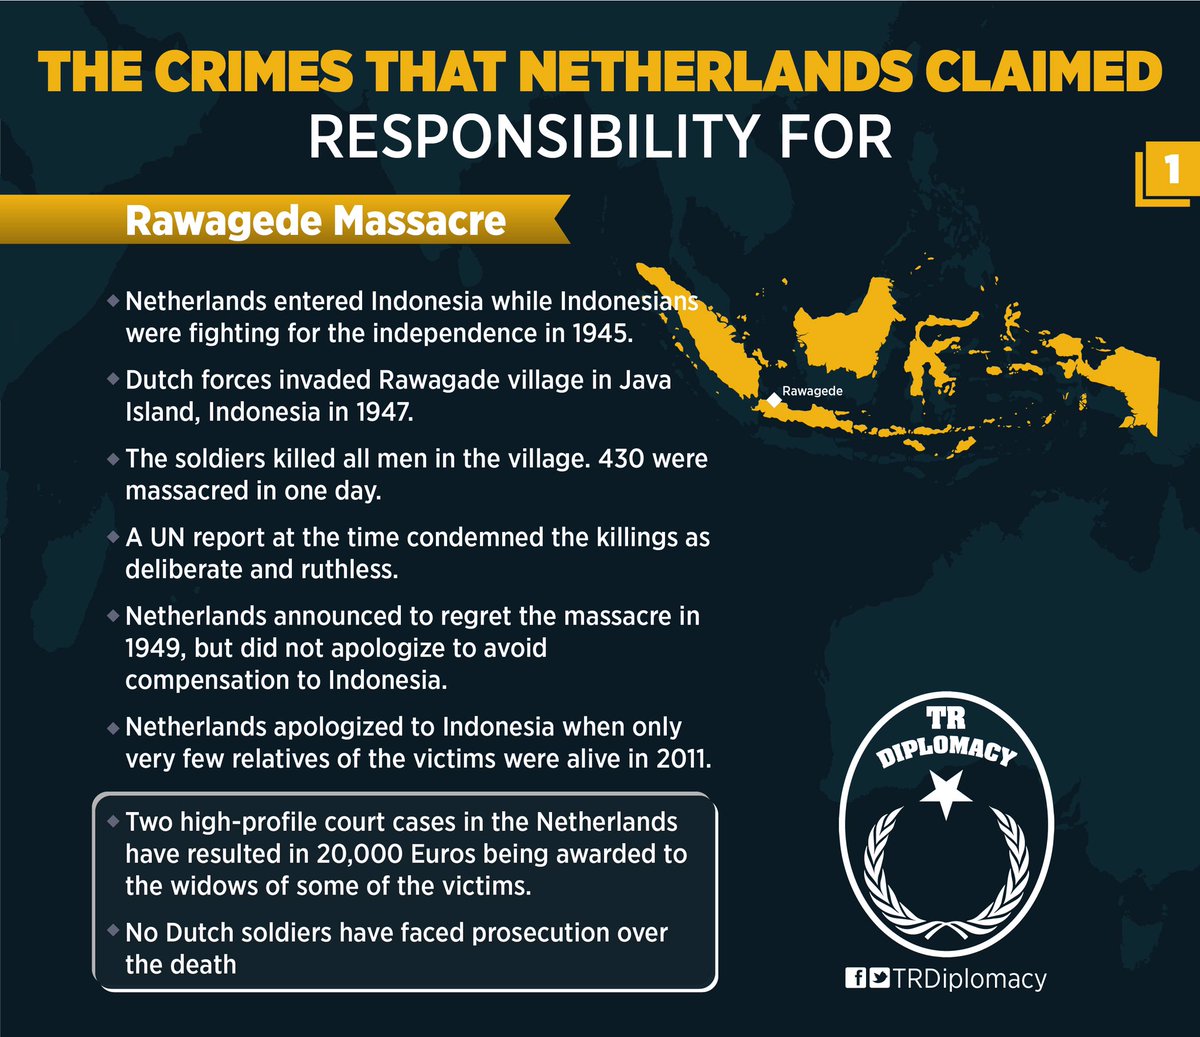 The crimes that Netherlands claimed responsibility for